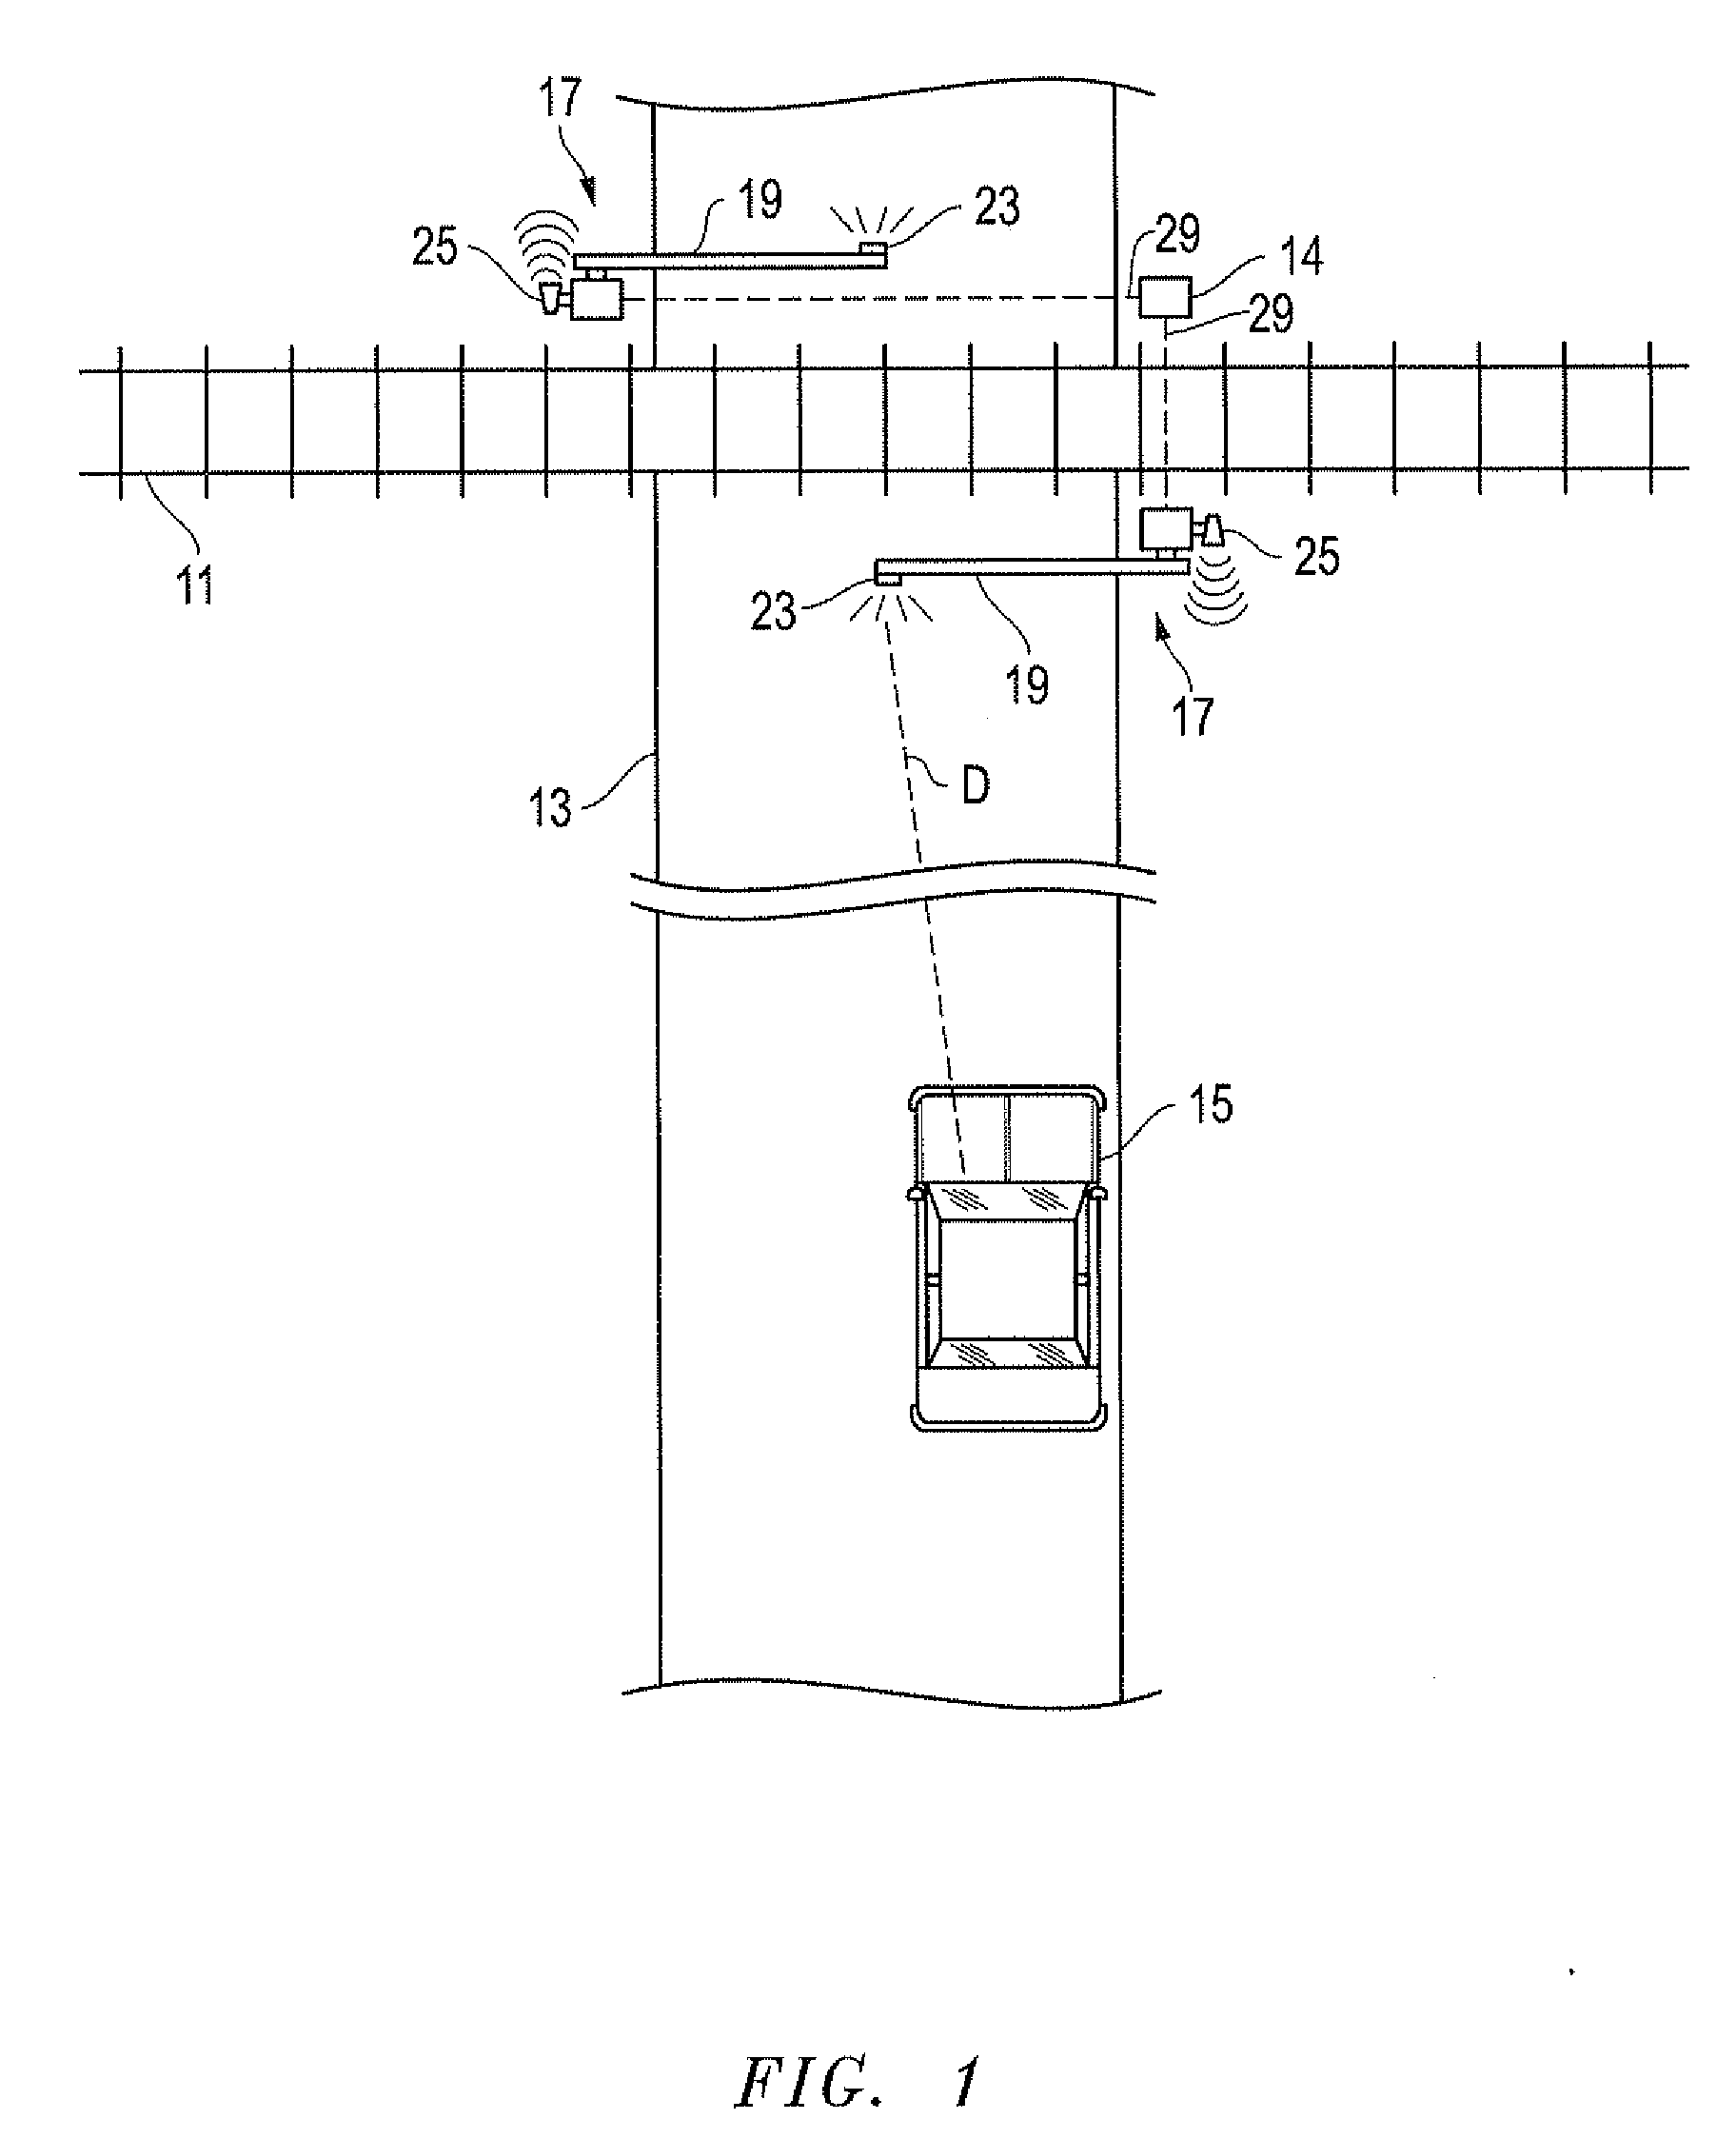 System, method and apparatus for railroad gate flasher assembly having a sealed, rodent-proof connection between in-place foundation and utility mast